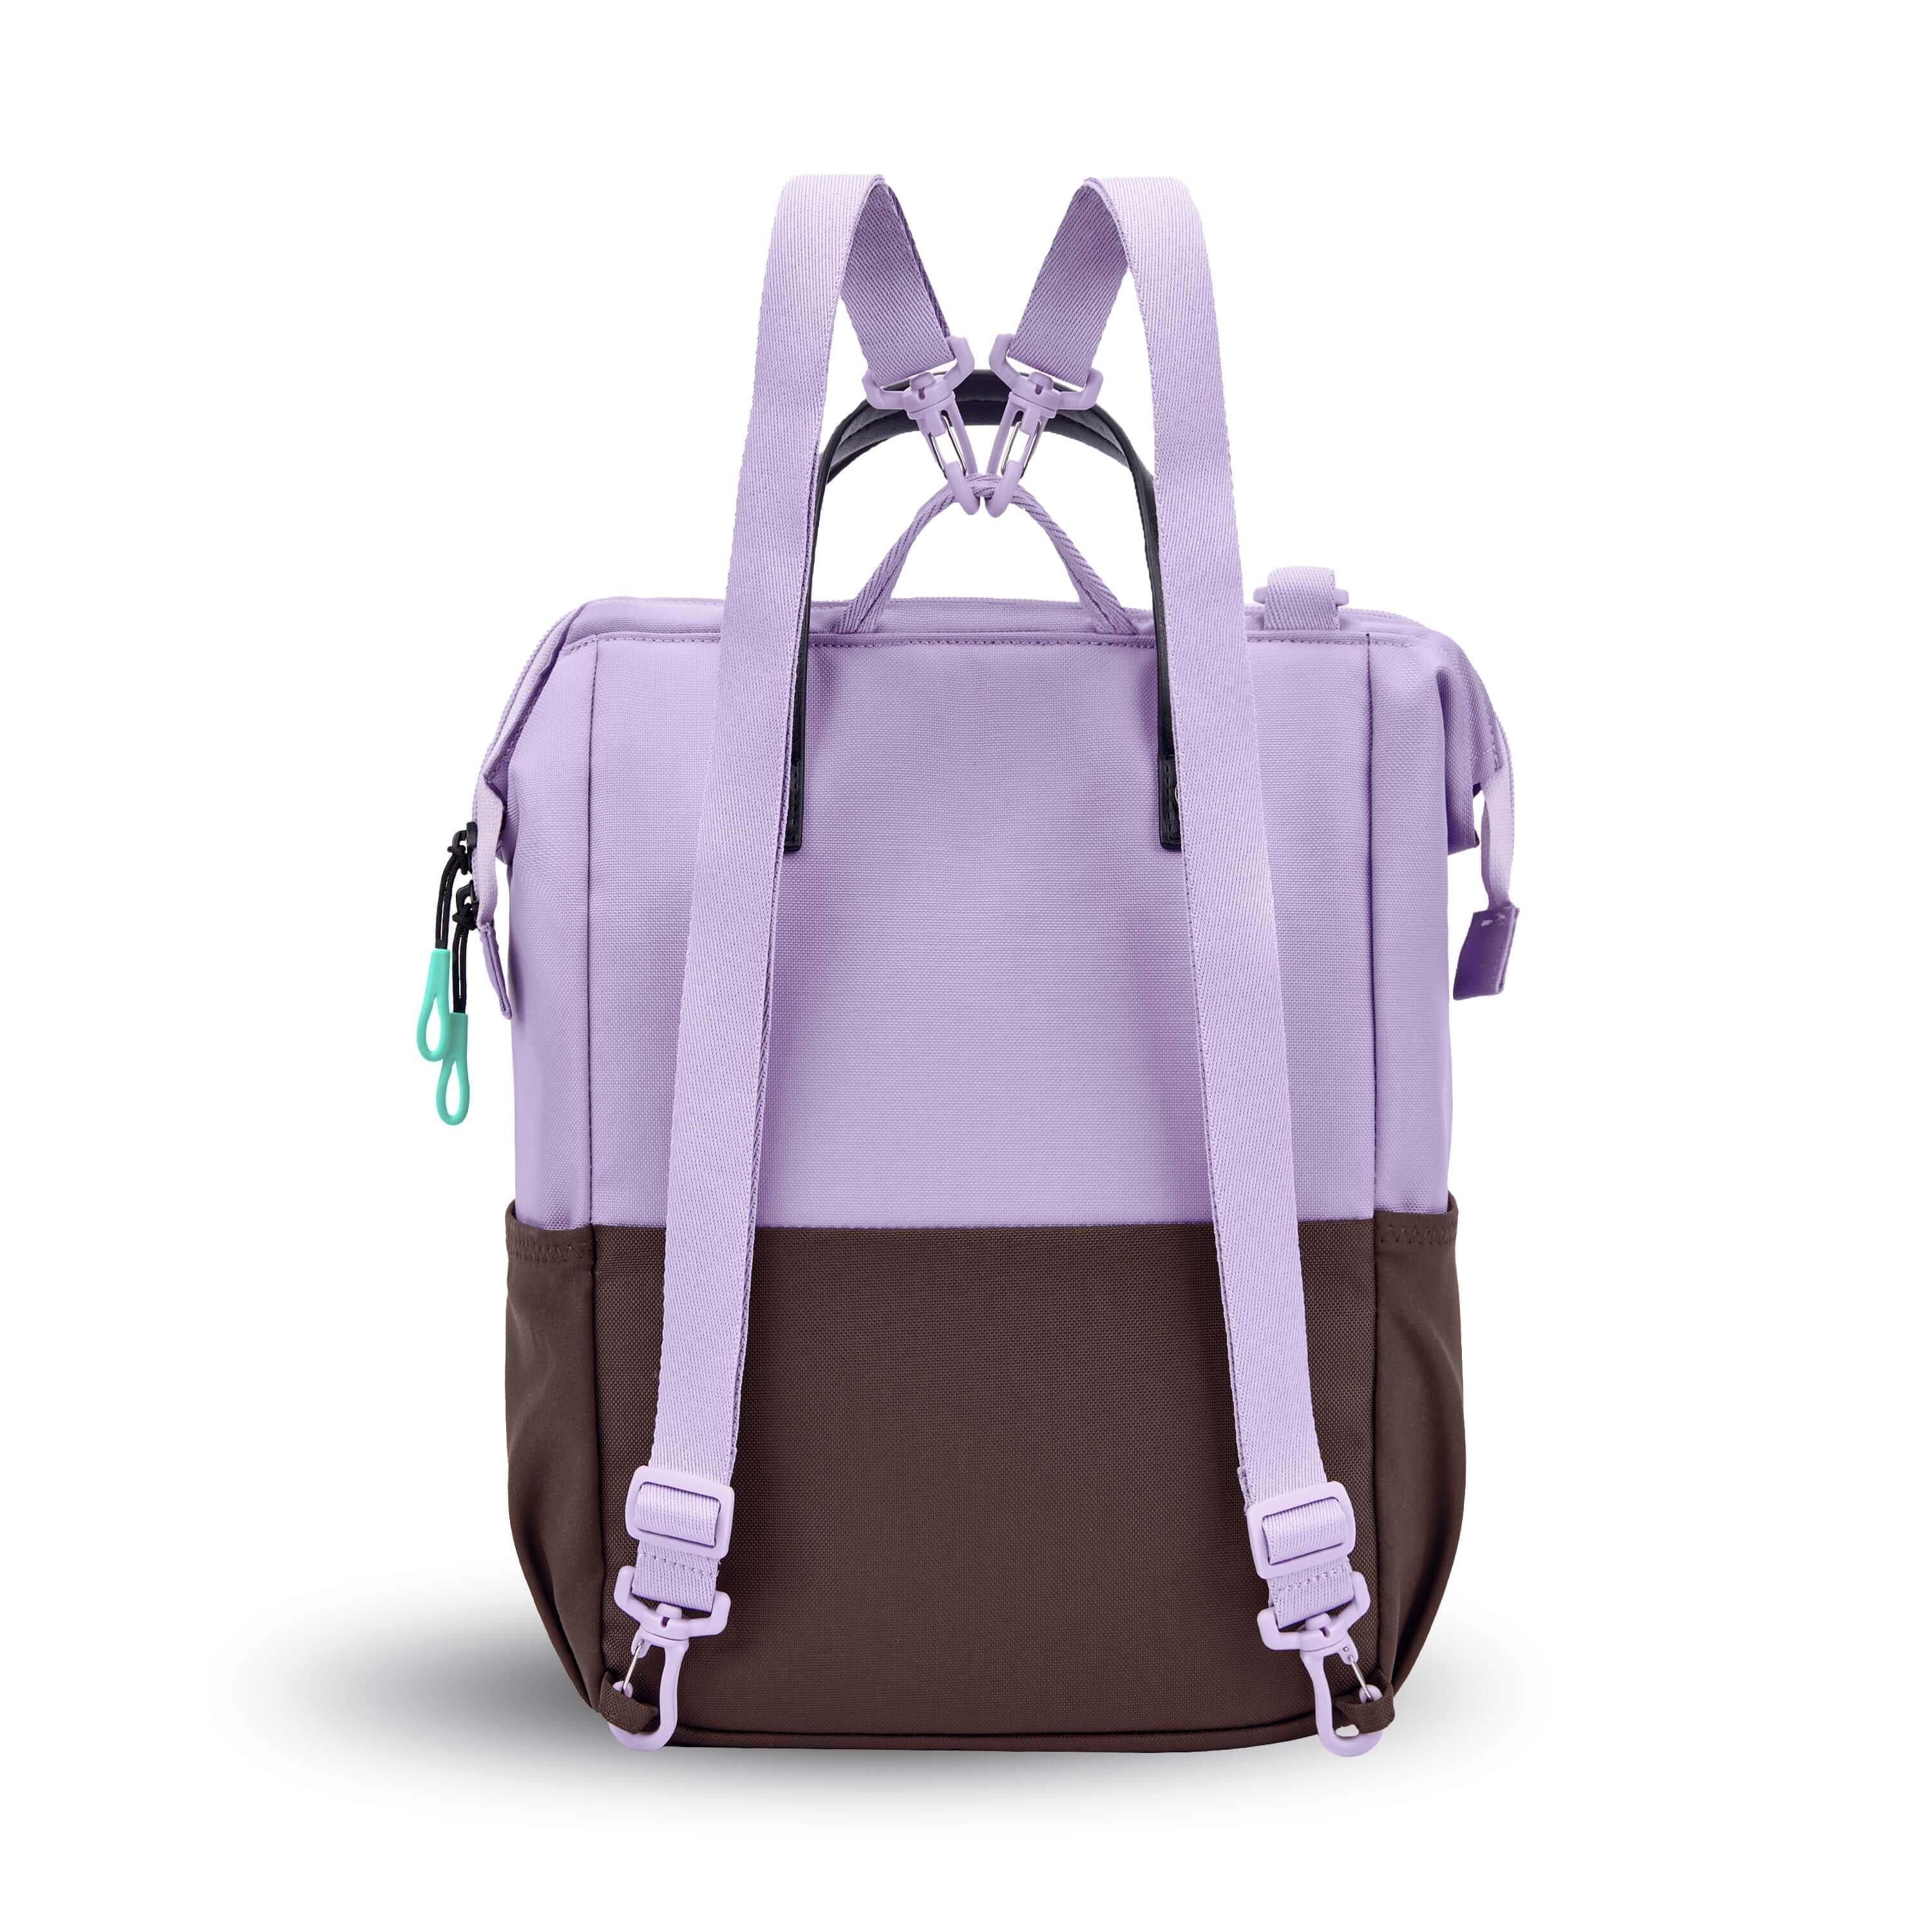 Back view of Sherpani three-in-one bag, the Dispatch in Lavender. The detachable straps are shown in the backpack style. 